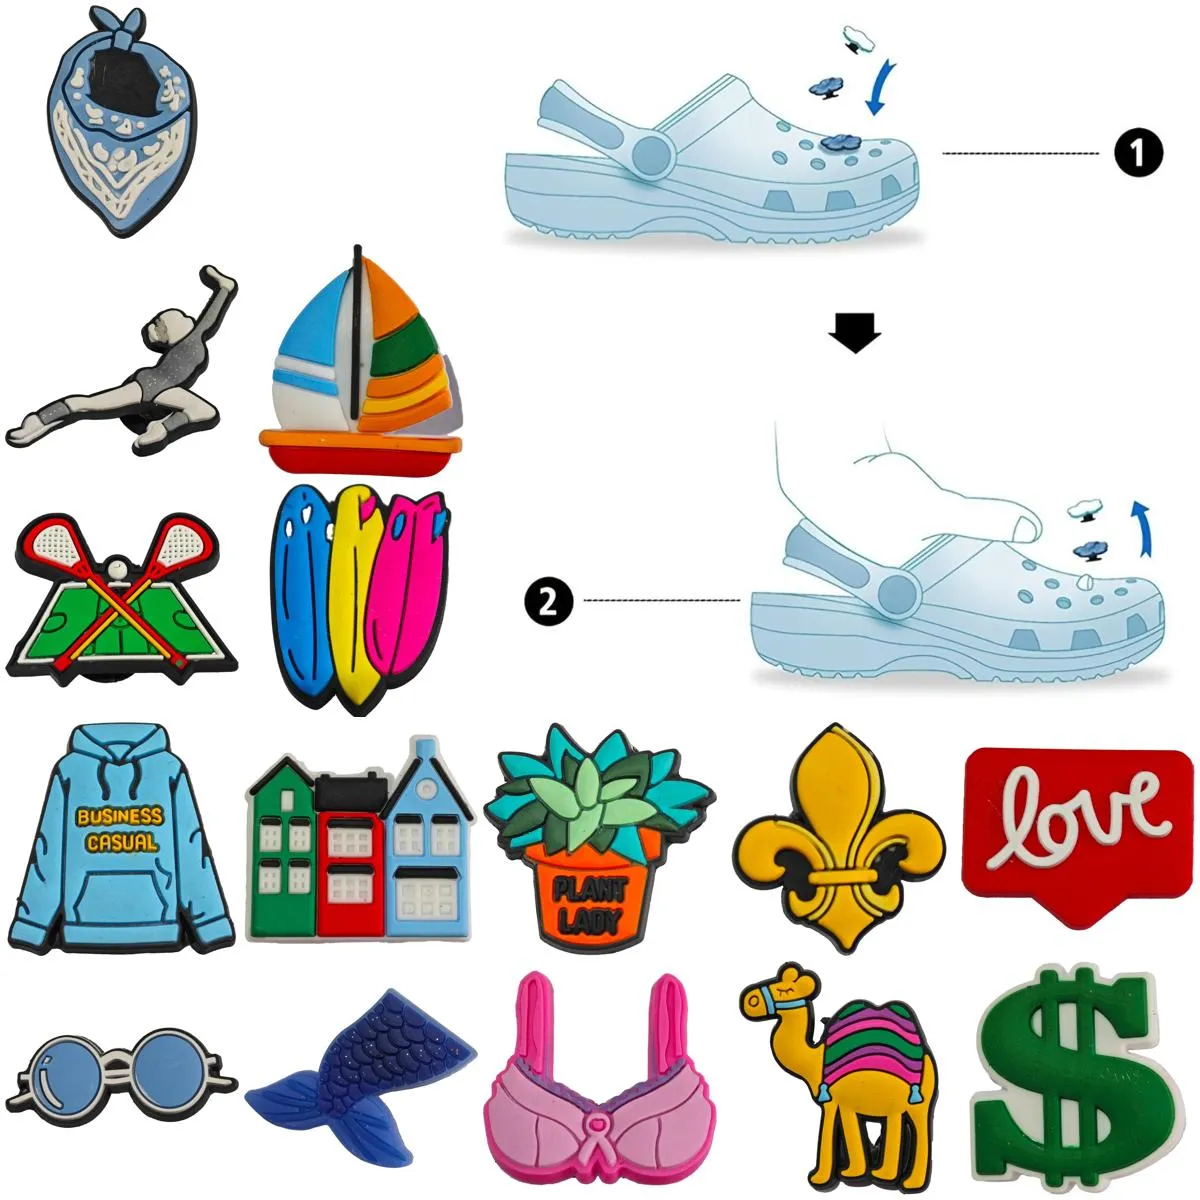 Shoe Parts Accessories Pattern Charm For Clog Jibbitz Bubble Slides Sandals Pvc Decorations Christmas Birthday Gift Party Favors Lov Otoce